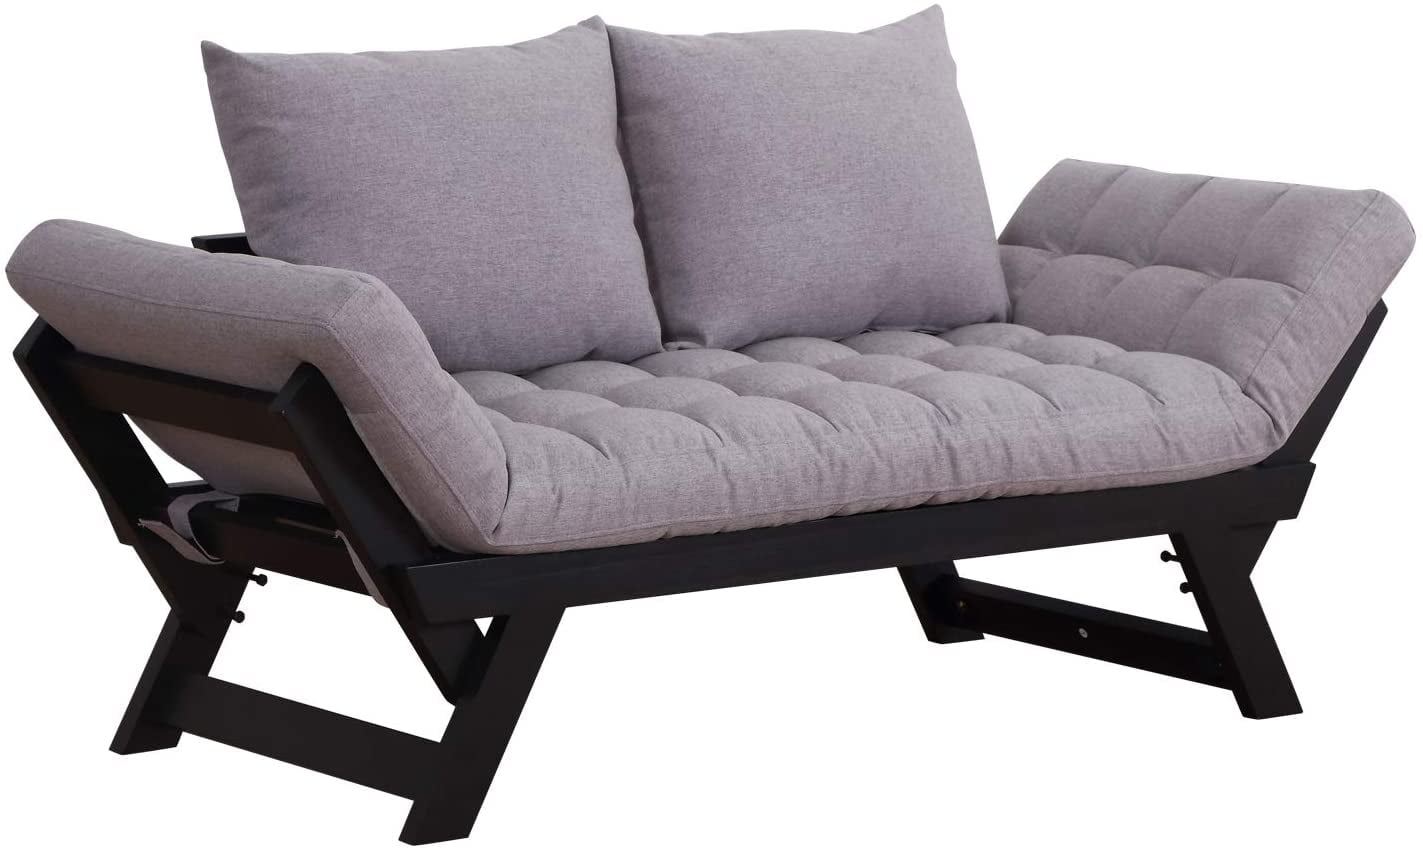 3 position sofa bed